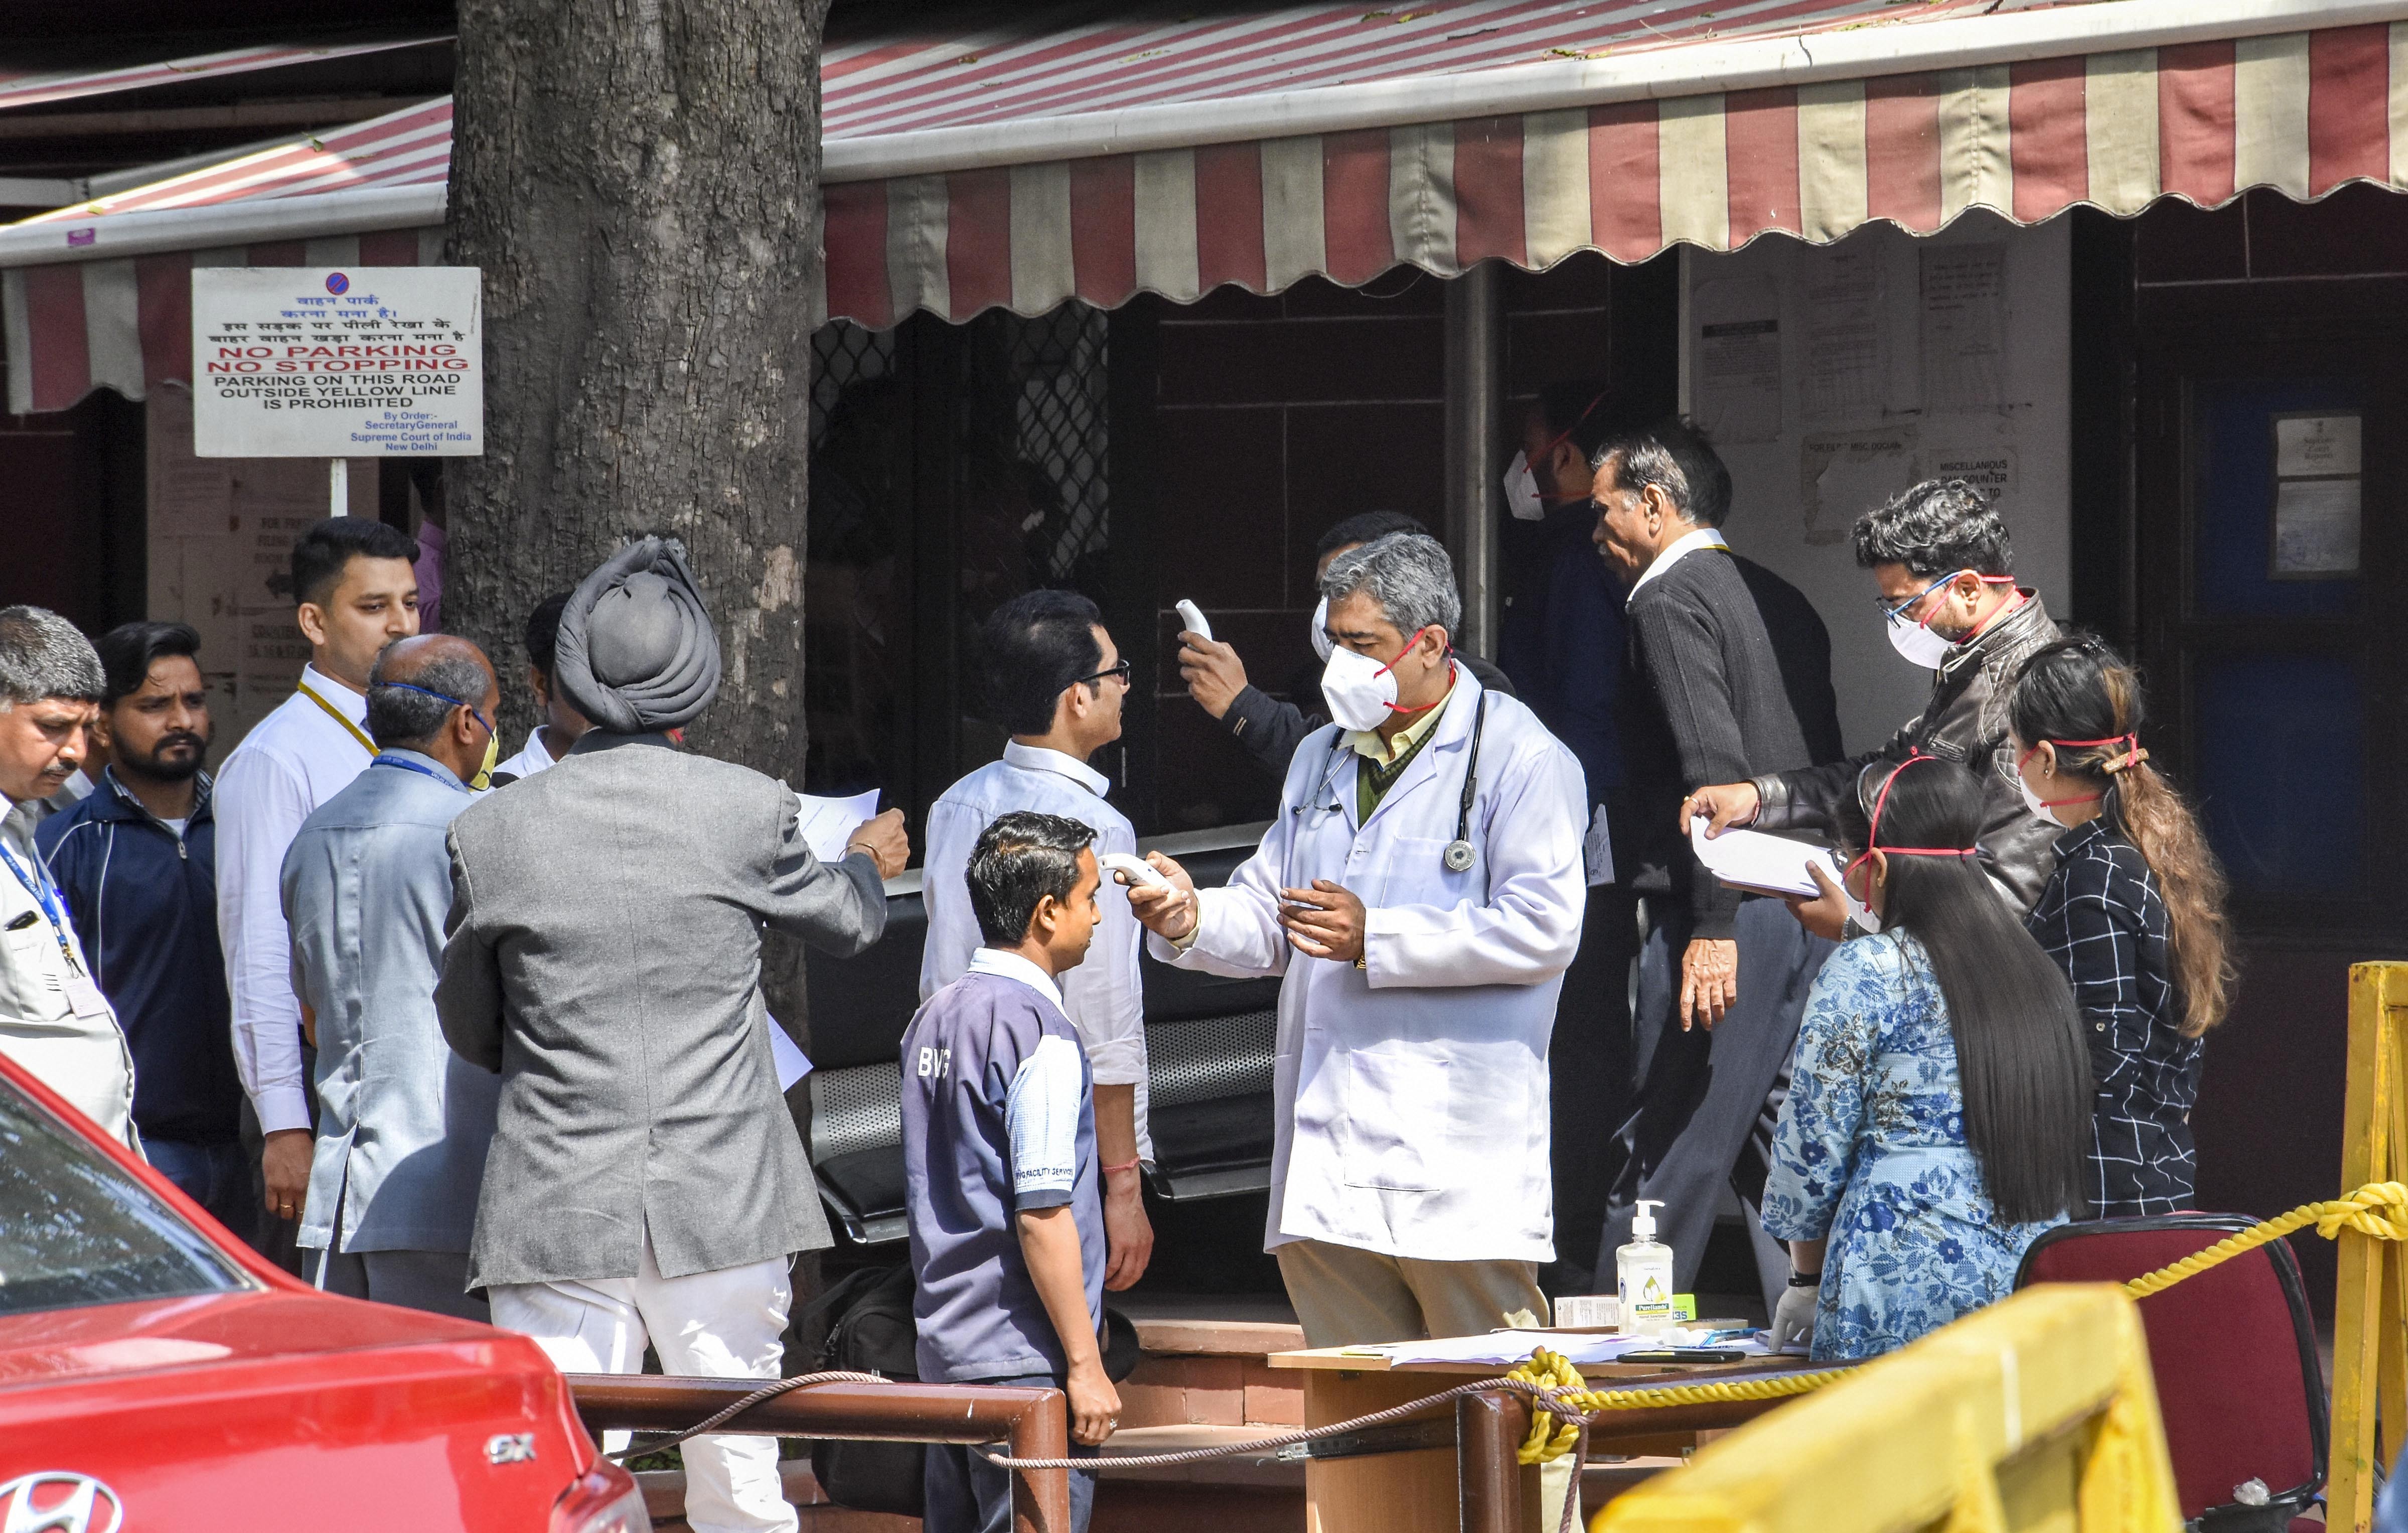 Members of Delhi government health department use screening devices on visitors in the wake of coronavirus, at the entrance of Supreme Court in New Delhi, Monday, March 16, 2020